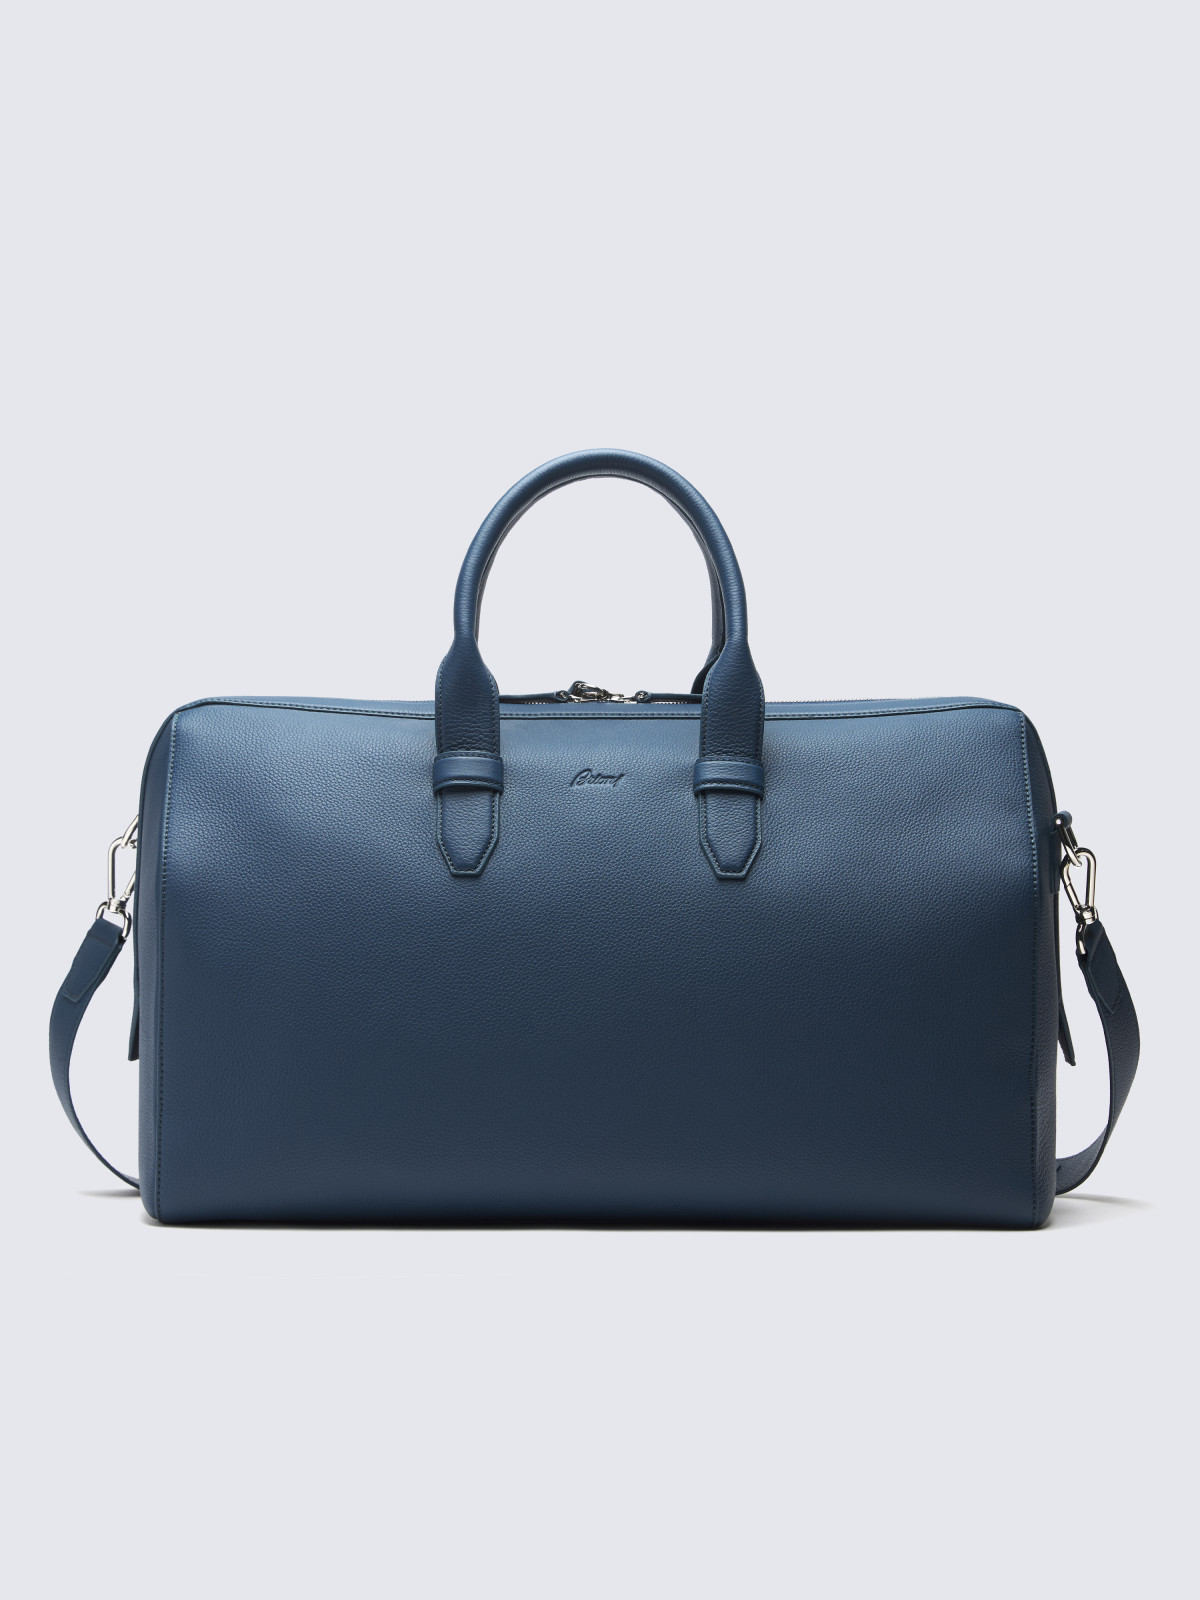 Sapphire blue grained leather duffle bag | Brioni® US Official Store